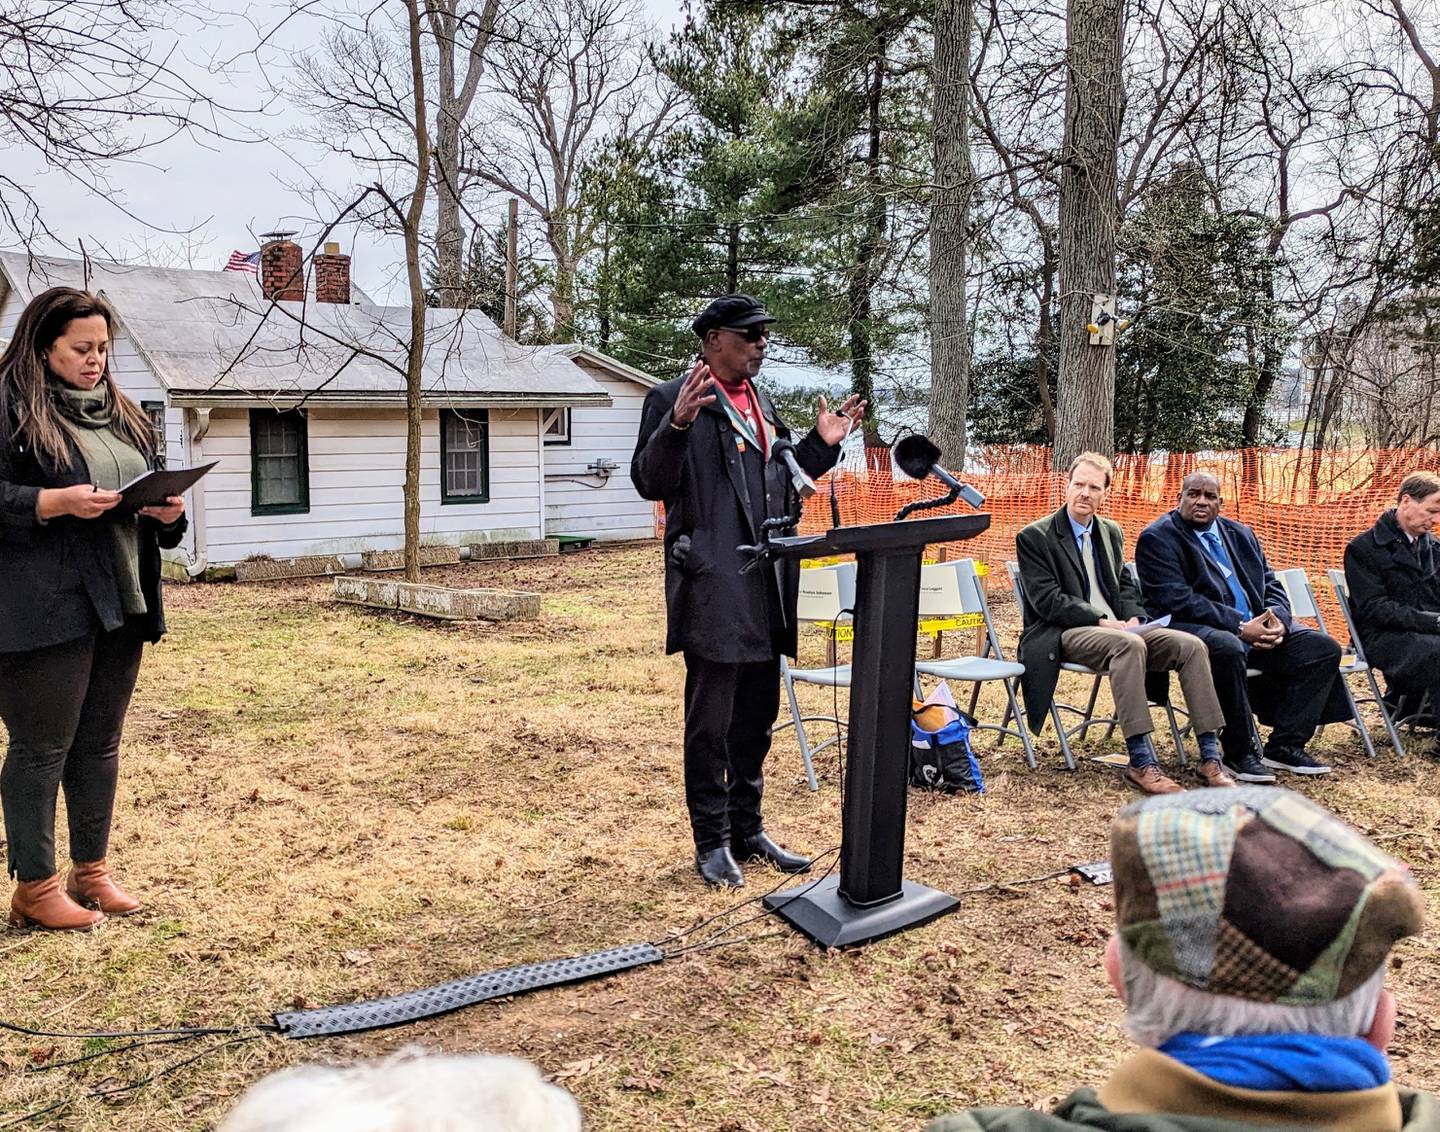 Vince Leggett, founder of the nonprofit Blacks of The Chesapeake, talks about the significance of the cottage once owned by Parlett Moore, a president of what was then Copping State Teachers College.